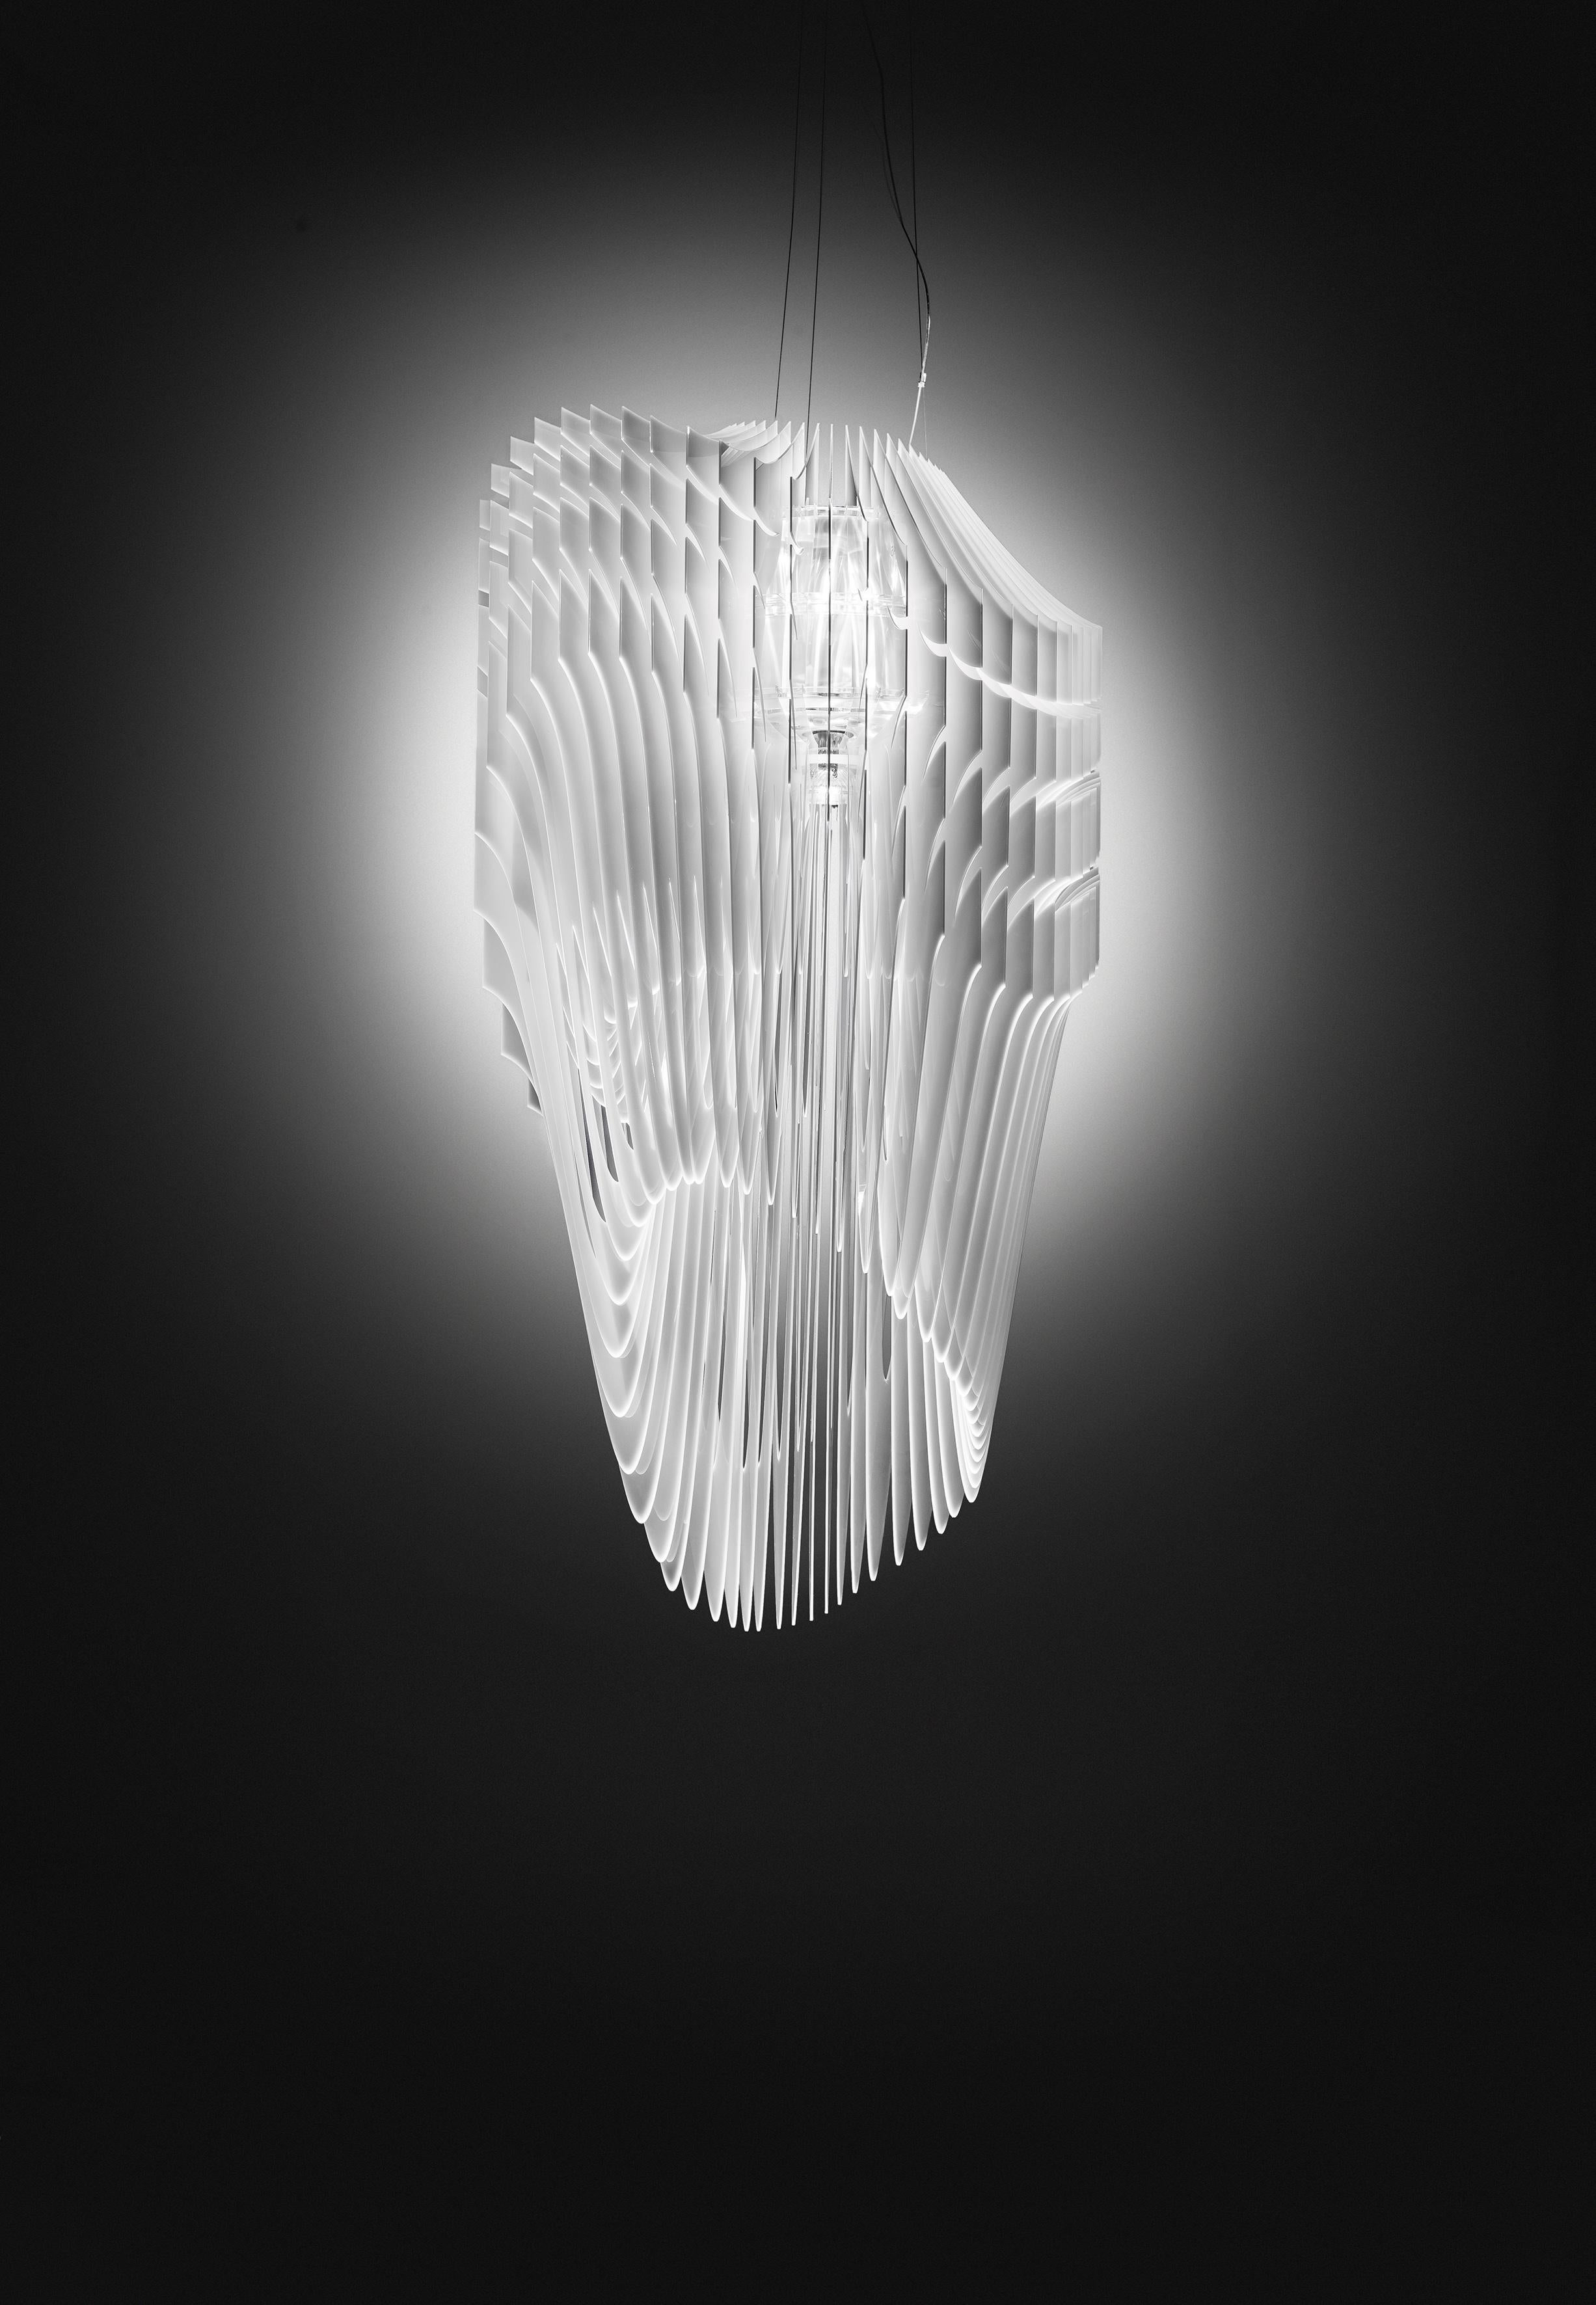 Zaha Hadid’s visionary, fluid, and dynamic luminous architectural objects bring the designer’s revolutionary and iconic semantics to any domestic or public space, inspiring harmony between beings and atmospheres. Avia brings the grandeur of